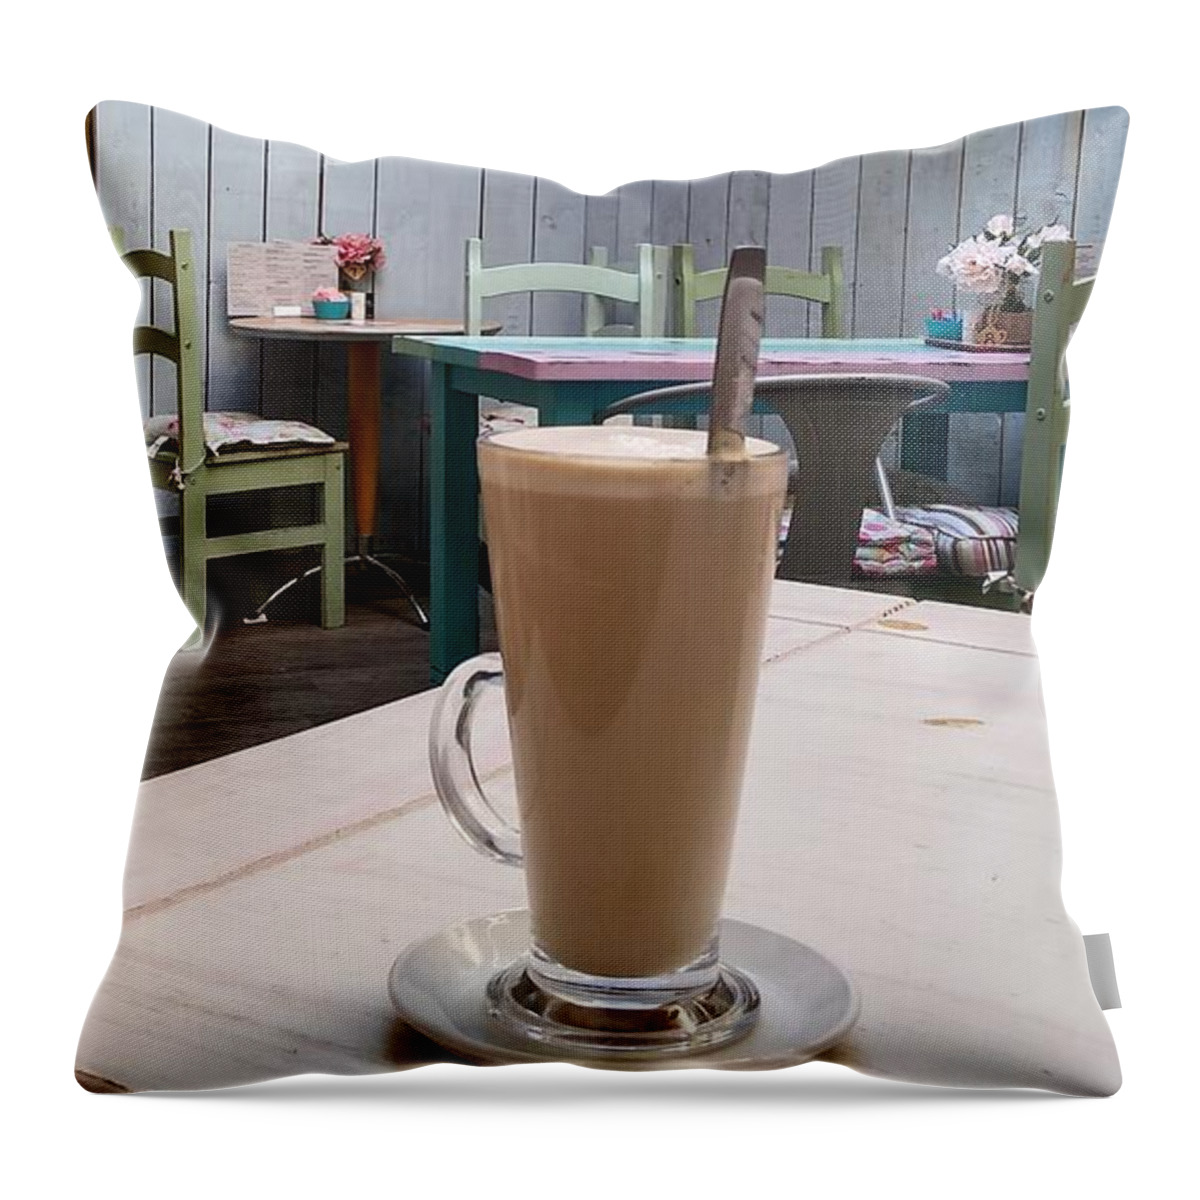 Latte Time Throw Pillow featuring the photograph Latte Time by Lachlan Main